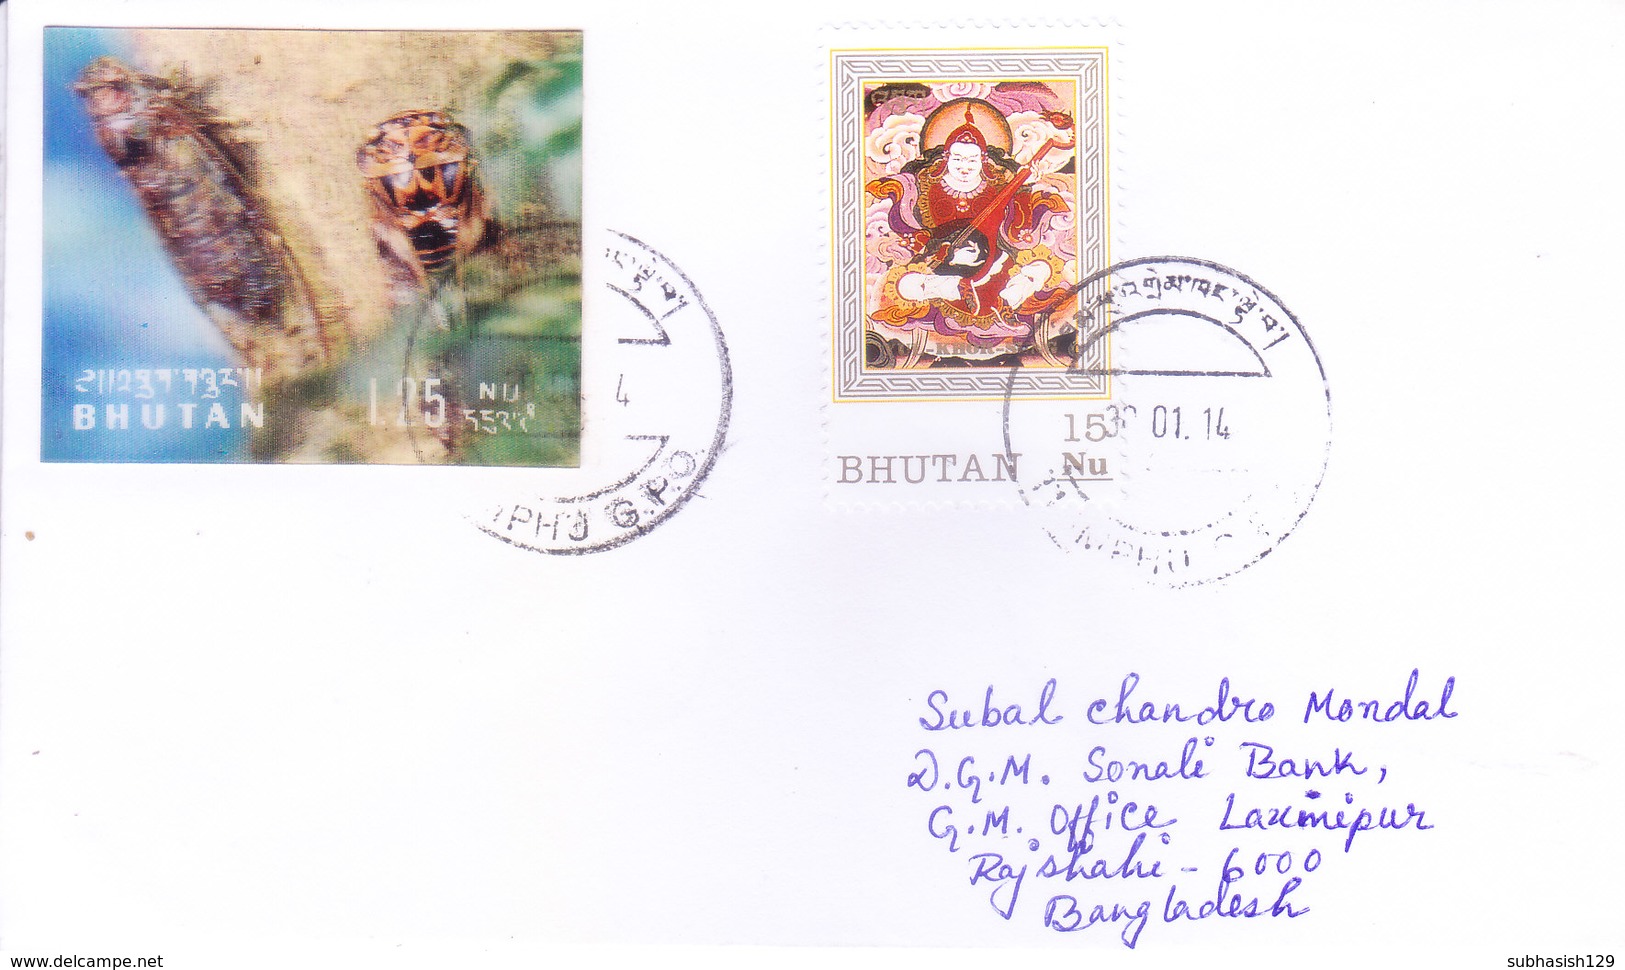 BHUTAN : COMMERCIAL COVER : POSTED FROM THIMPU G.P.O. : USE OF 3D STAMP : NATURE - Bhutan